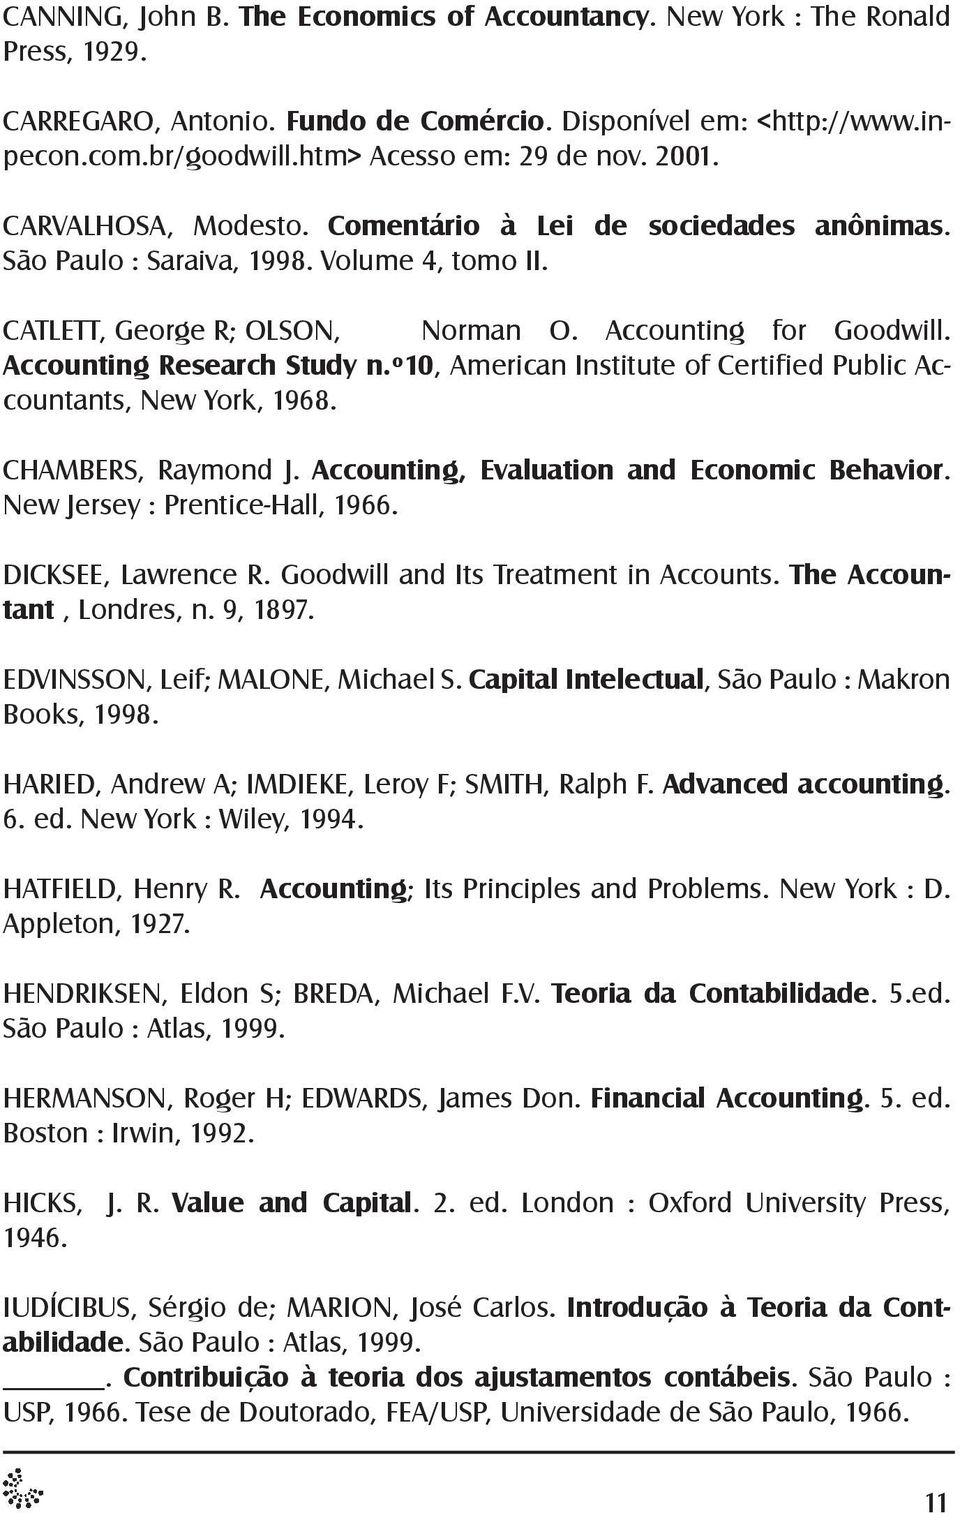 Accounting Research Study n.º10, American Institute of Certified Public Accountants, New York, 1968. CHAMBERS, Raymond J. Accounting, Evaluation and Economic Behavior.